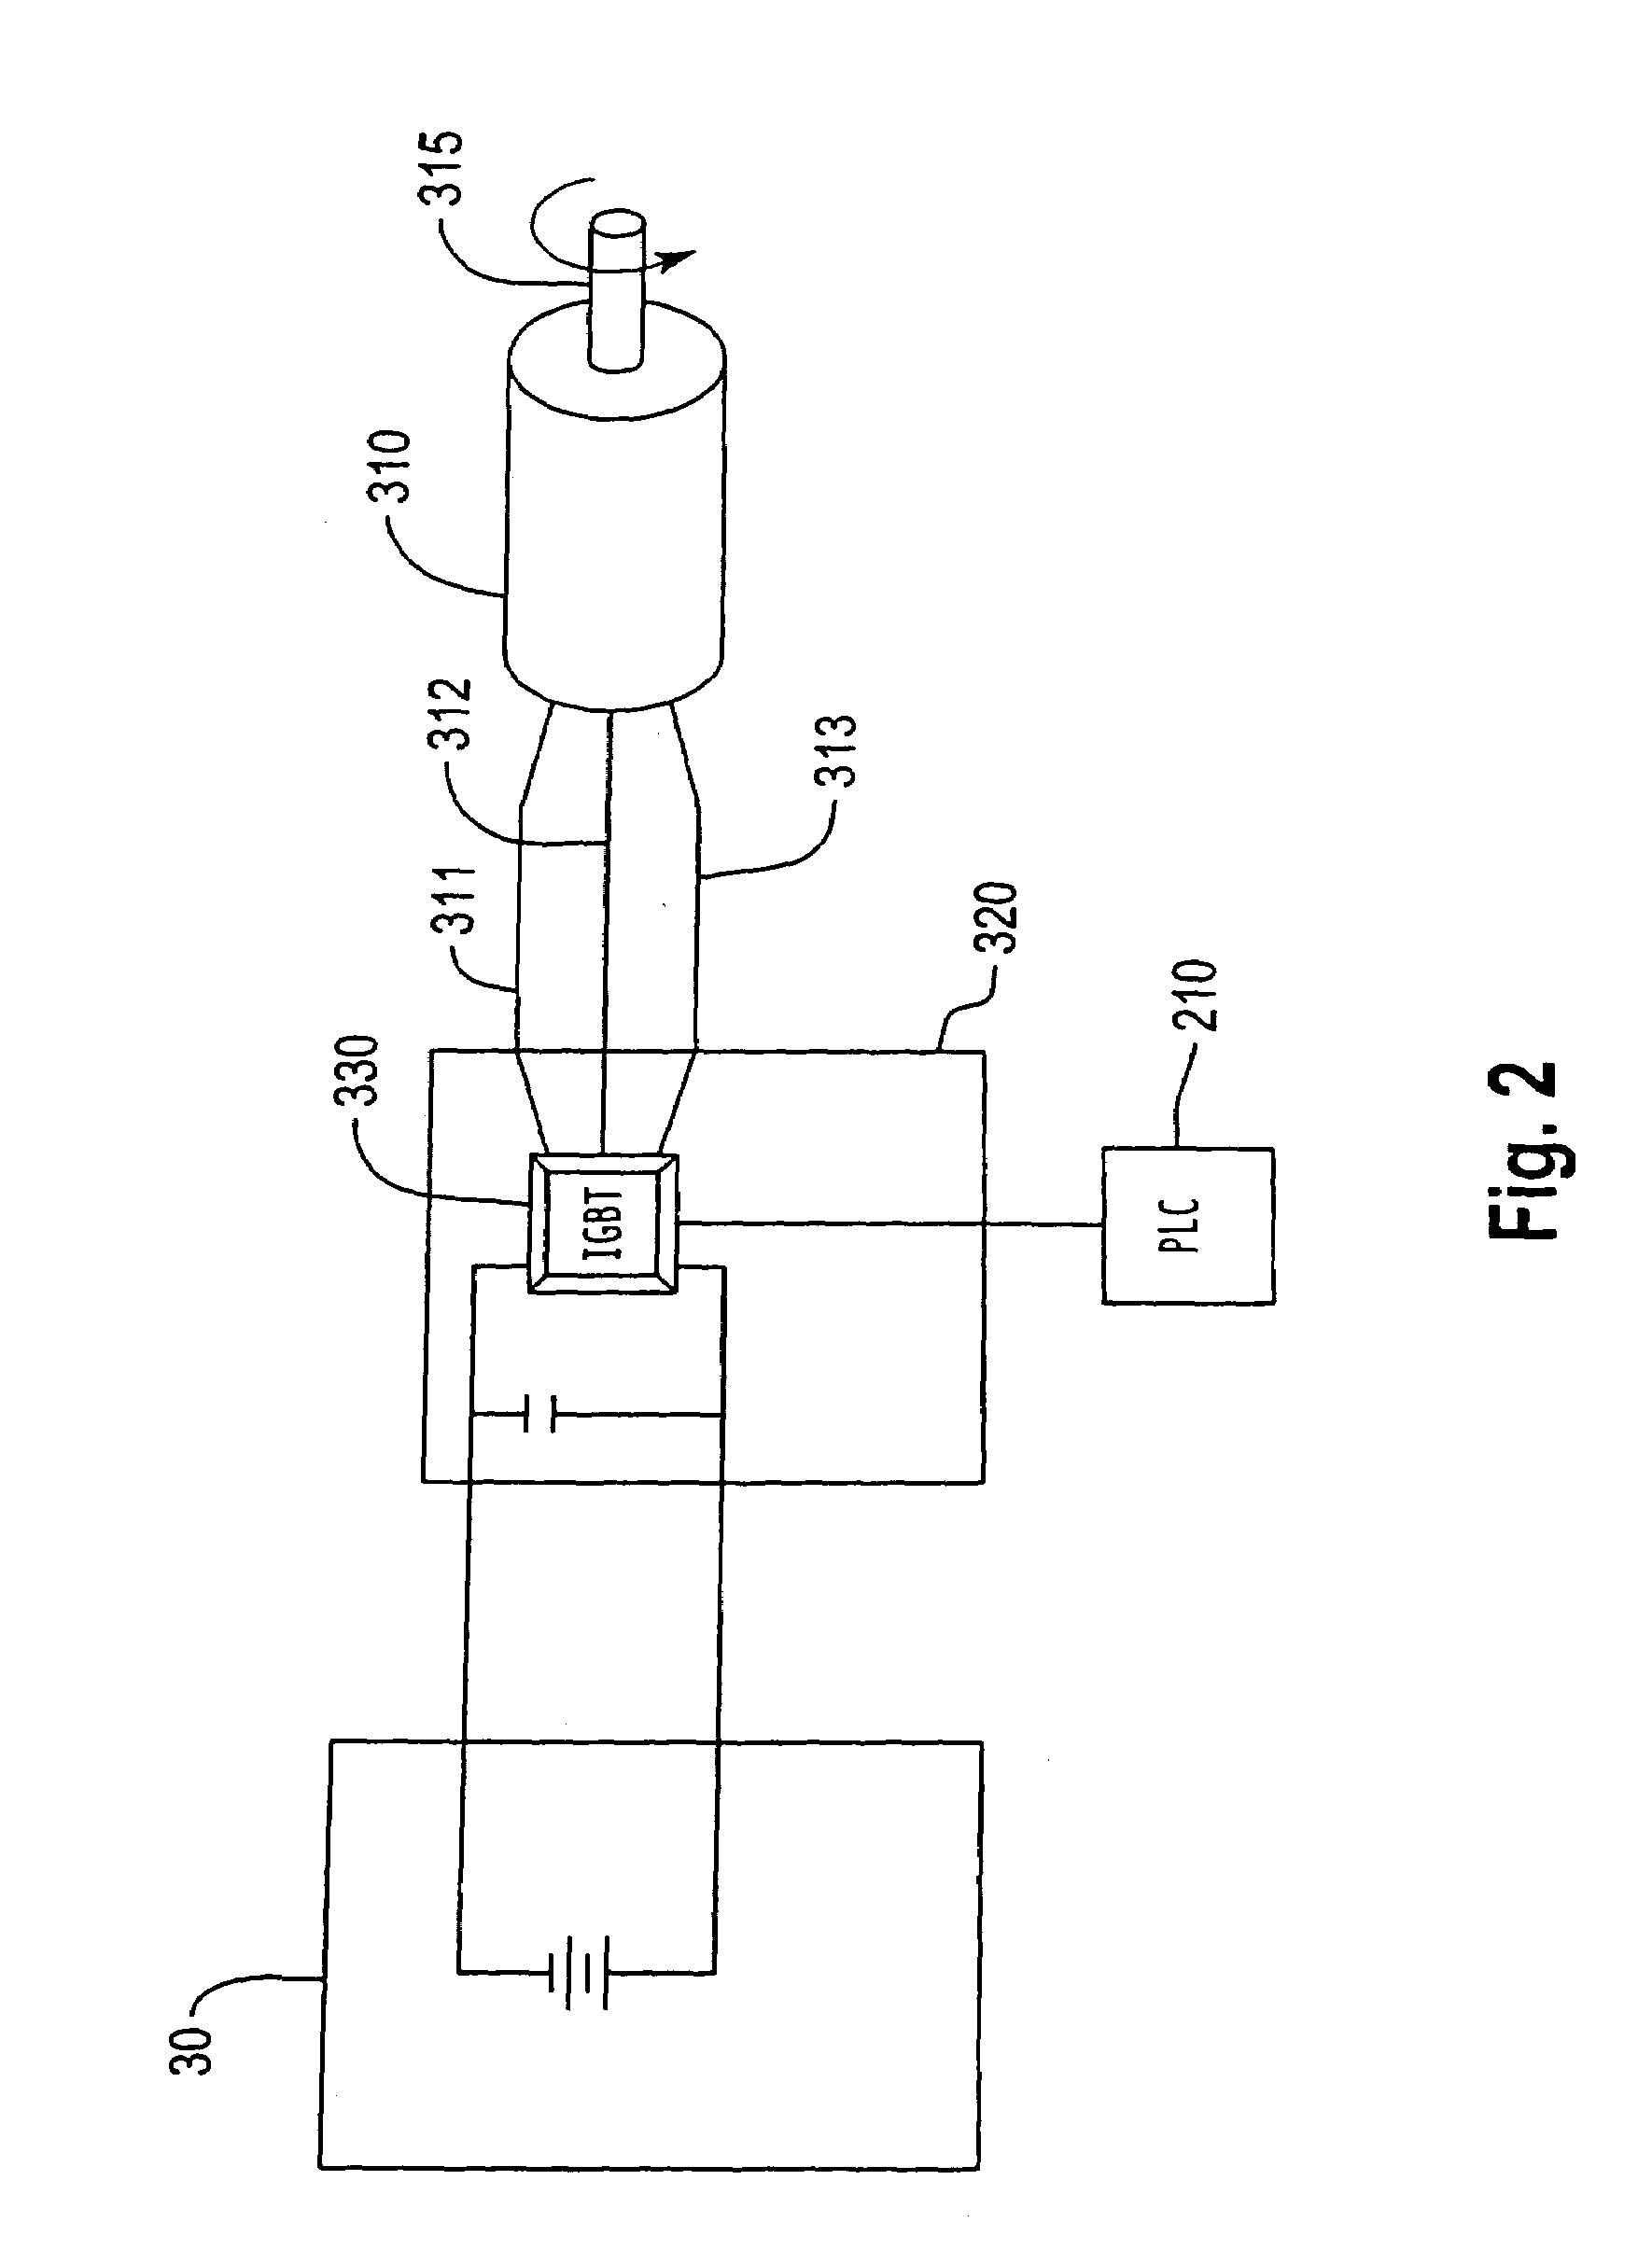 Method and apparatus for selective operation of a hybrid electric vehicle in various driving modes